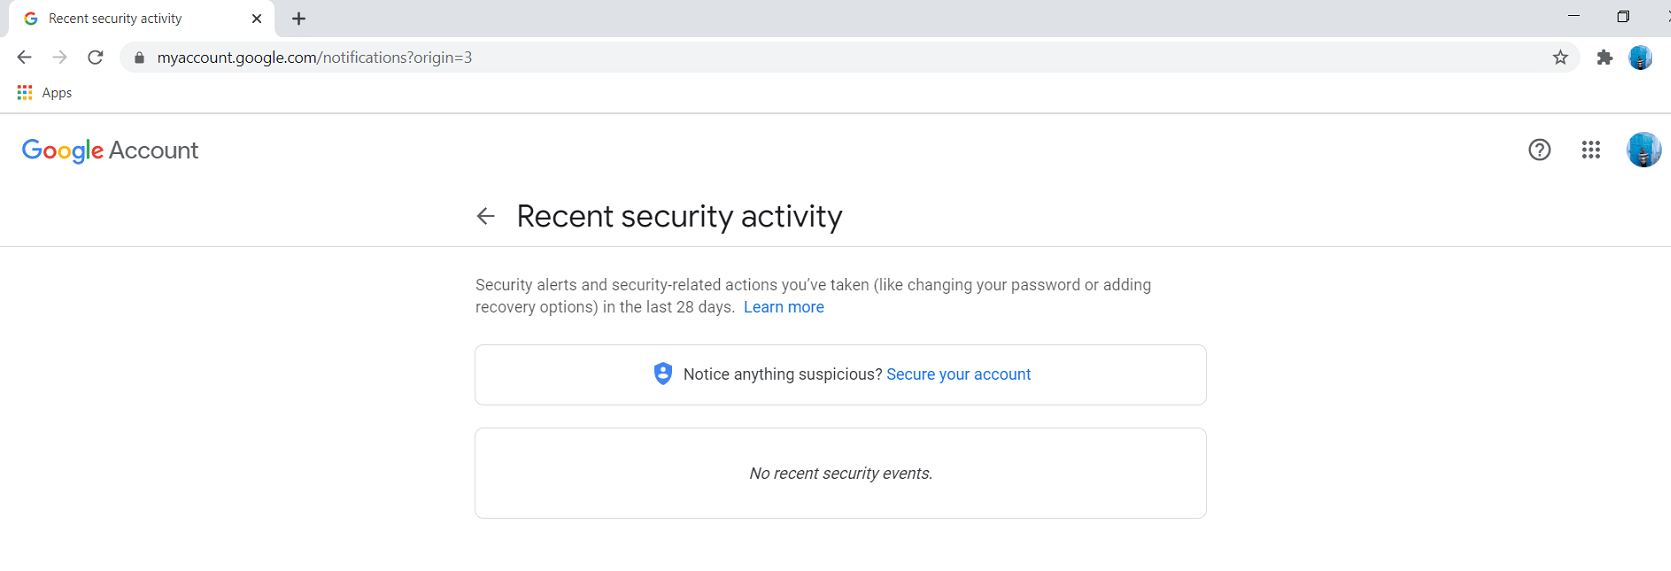 After that, click on the Recent Security Activity tab